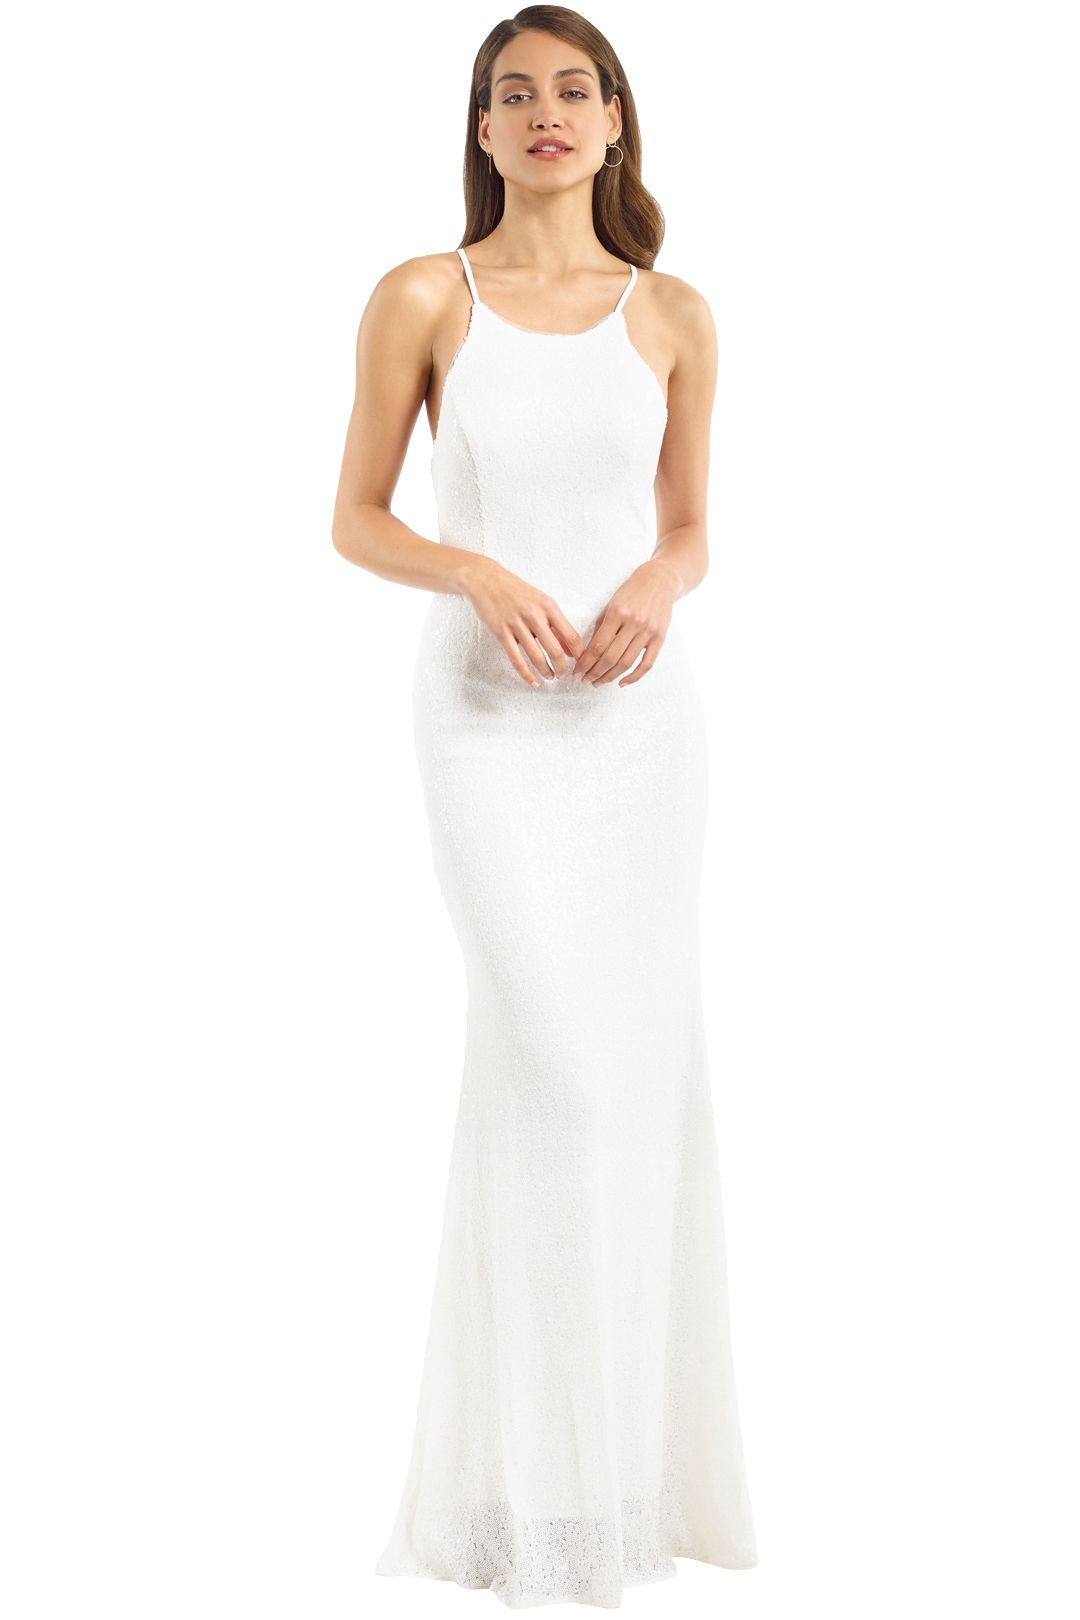 Sadie Sequin Gown in Vintage White by Tania Olsen for Hire | GlamCorner